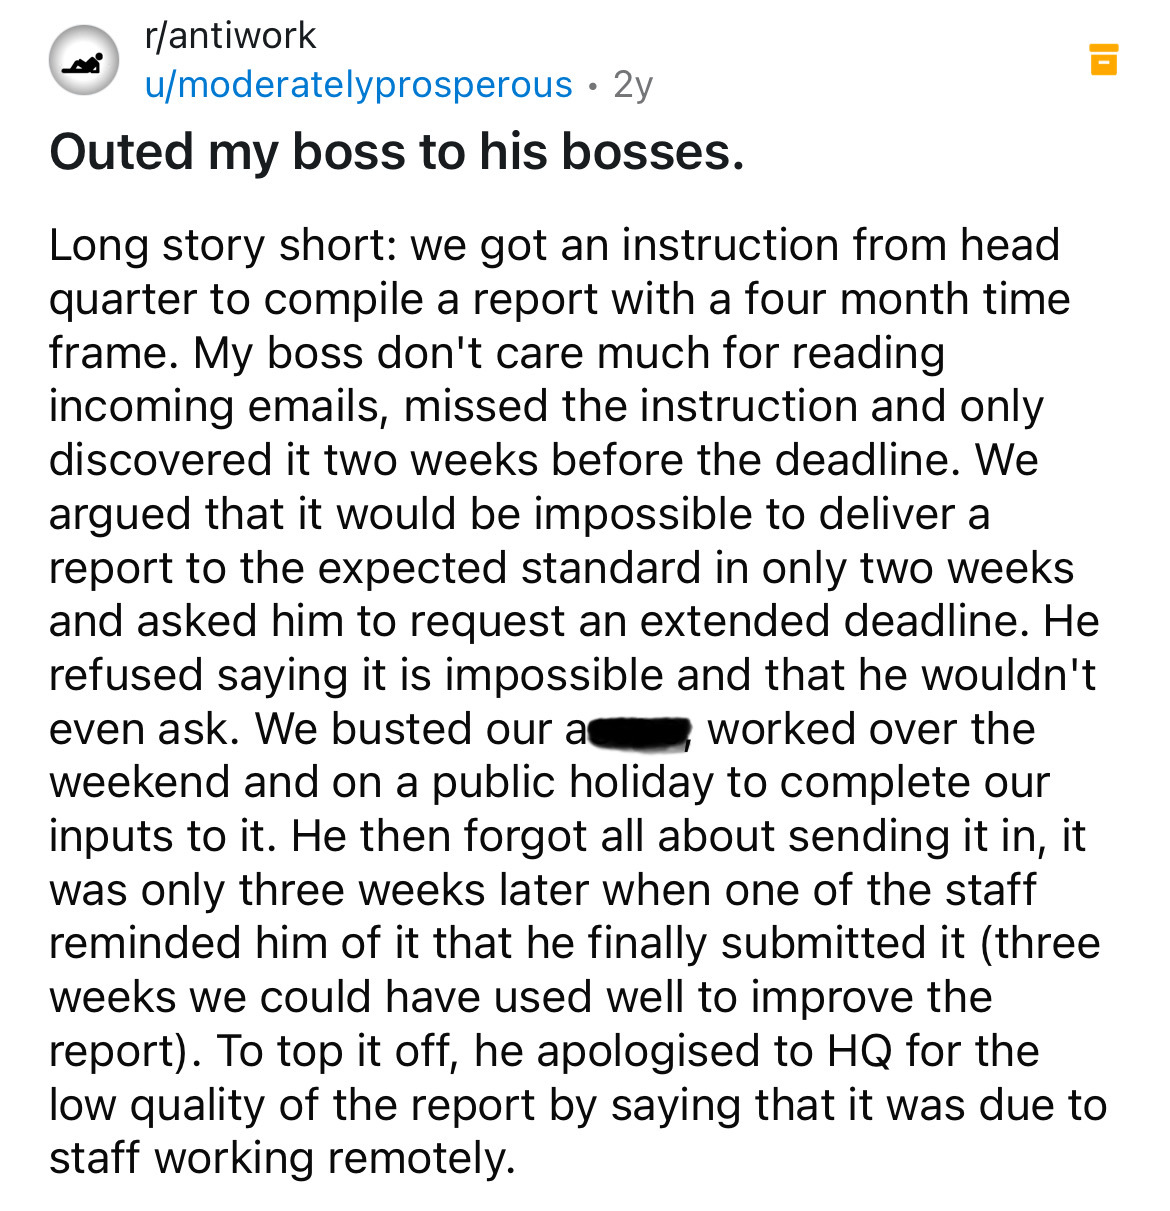 screenshot - rantiwork umoderatelyprosperous 2y Outed my boss to his bosses. Long story short we got an instruction from head quarter to compile a report with a four month time frame. My boss don't care much for reading incoming emails, missed the instruc